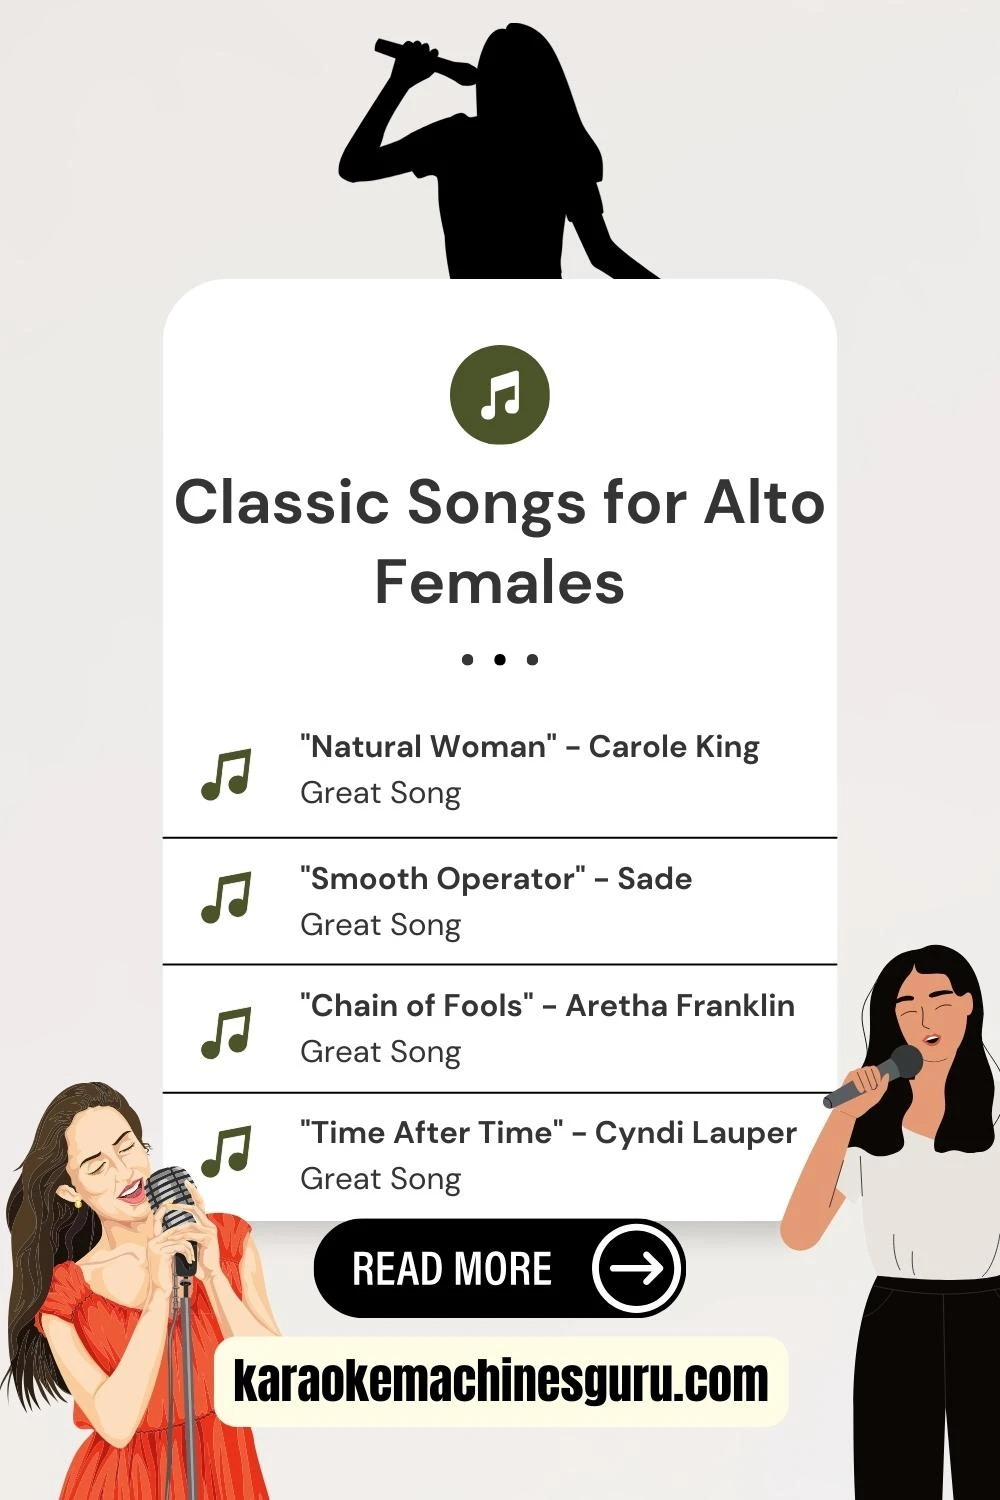 Classic Songs for Alto Females